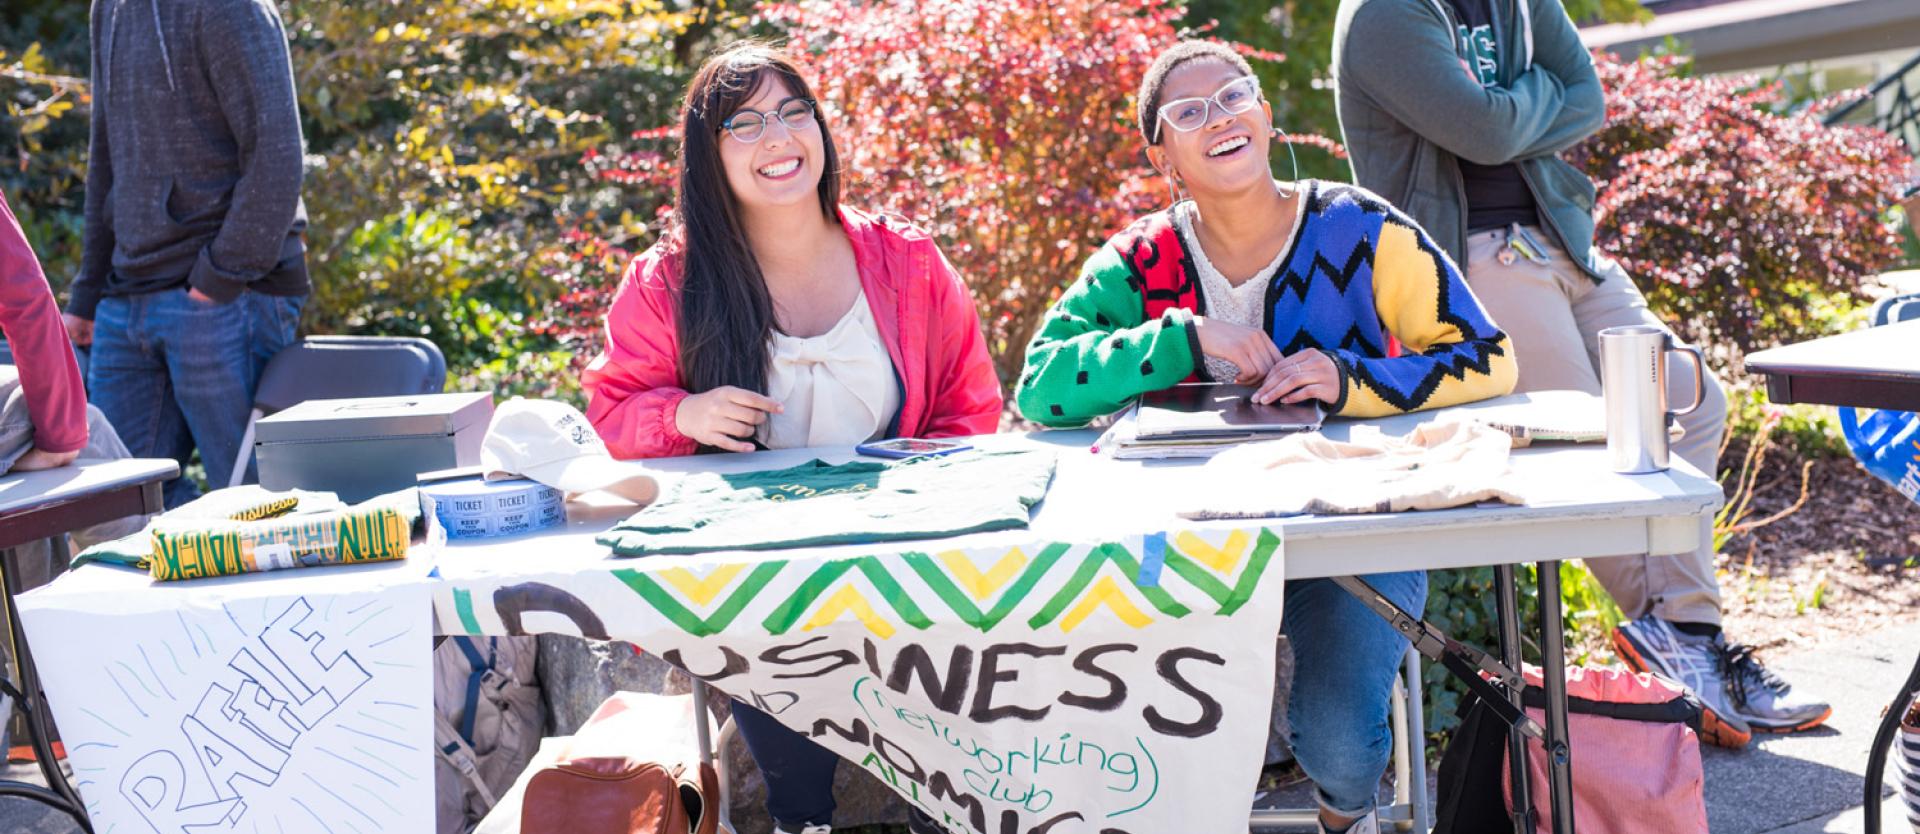 Two students sitting in front of a table outside smiling at the cameral